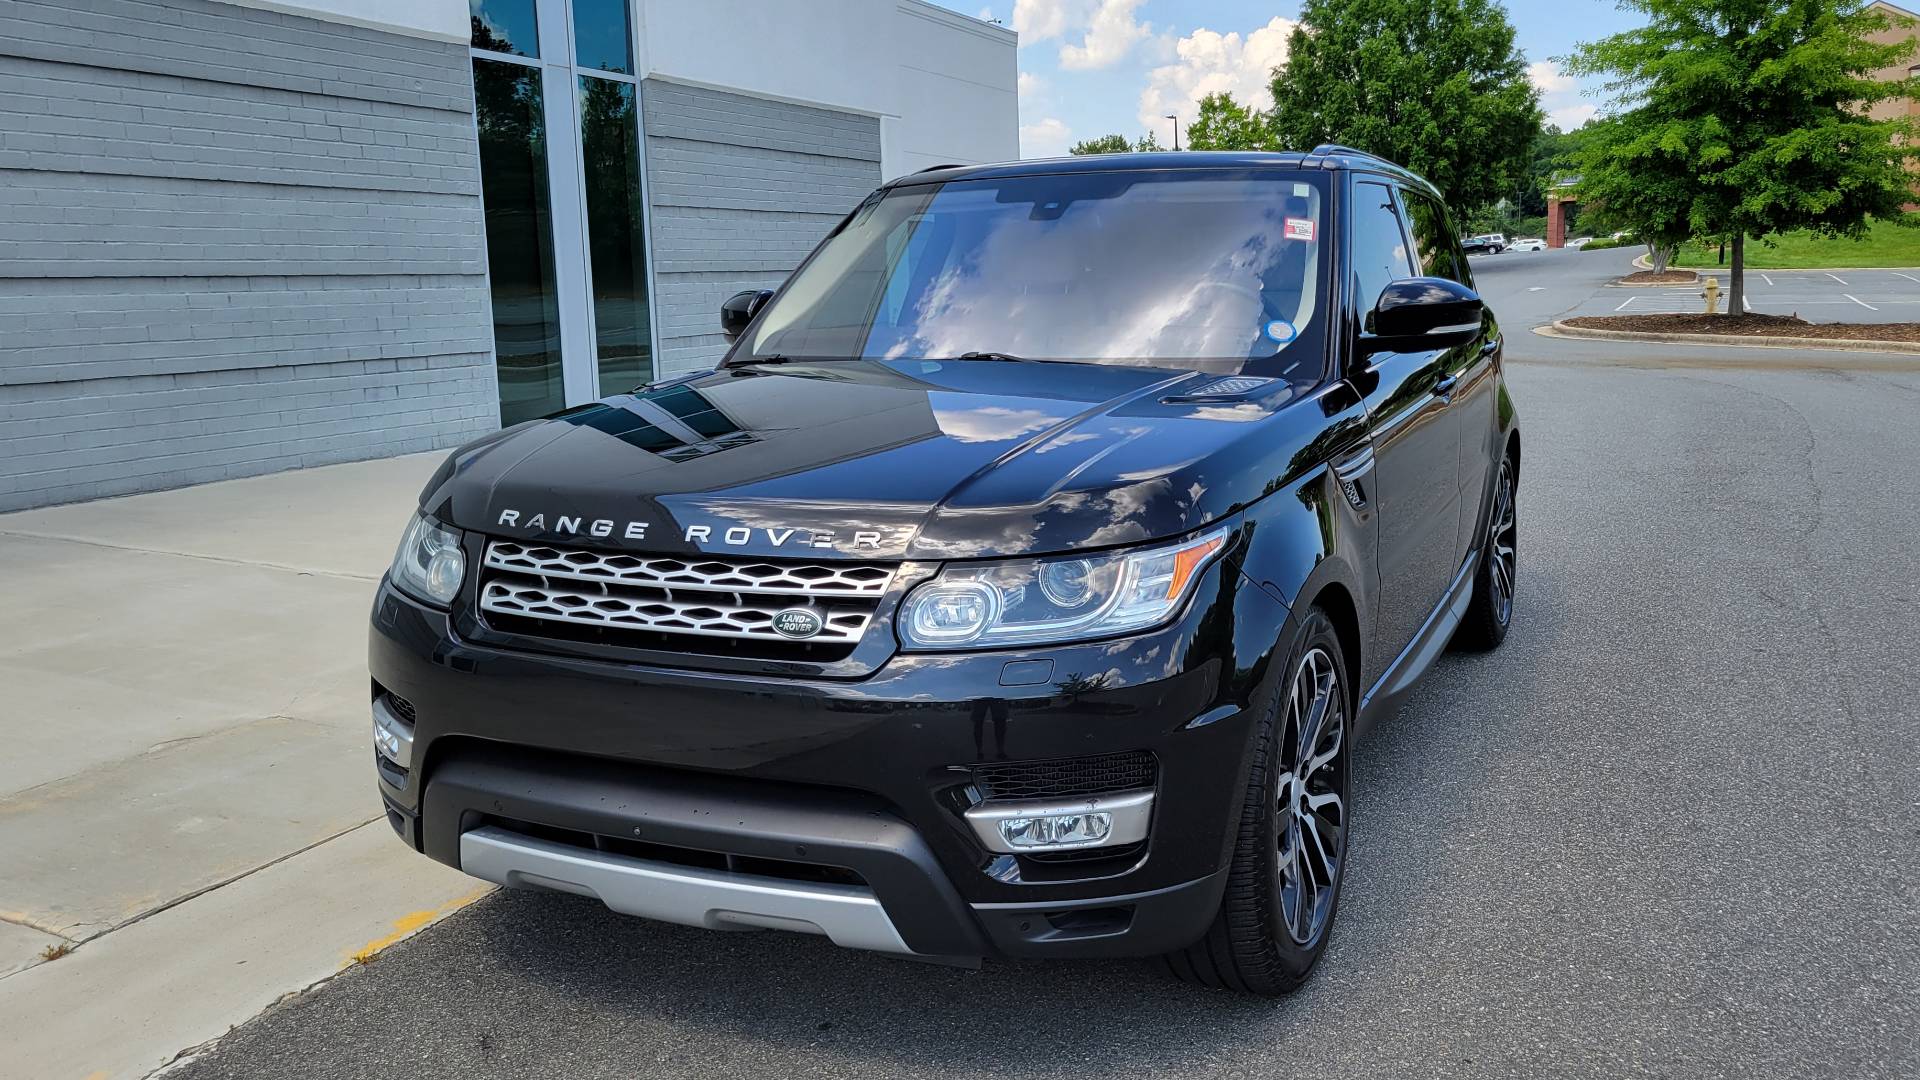 Used 2016 Land Rover RANGE ROVER SPORT HSE / SC V6 / 8-SPD AUTO / VISION & CONV PKG / TOWING PKG for sale $41,995 at Formula Imports in Charlotte NC 28227 2